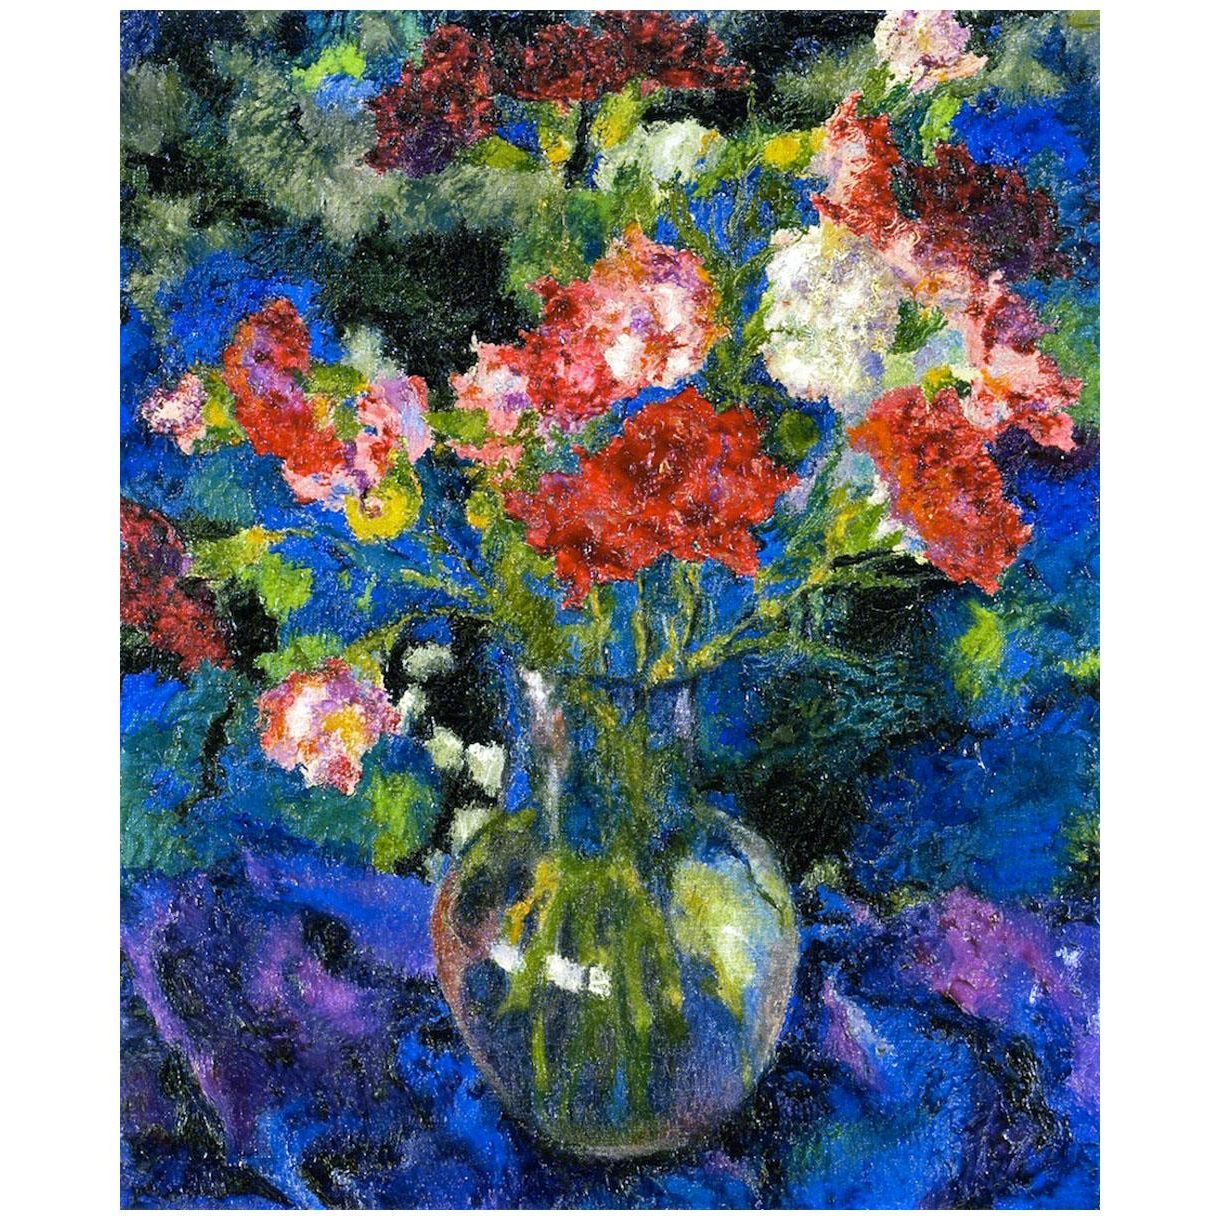 Augusto Giacometti. Carnations in a Round Glass Vase. 1918. Private collection